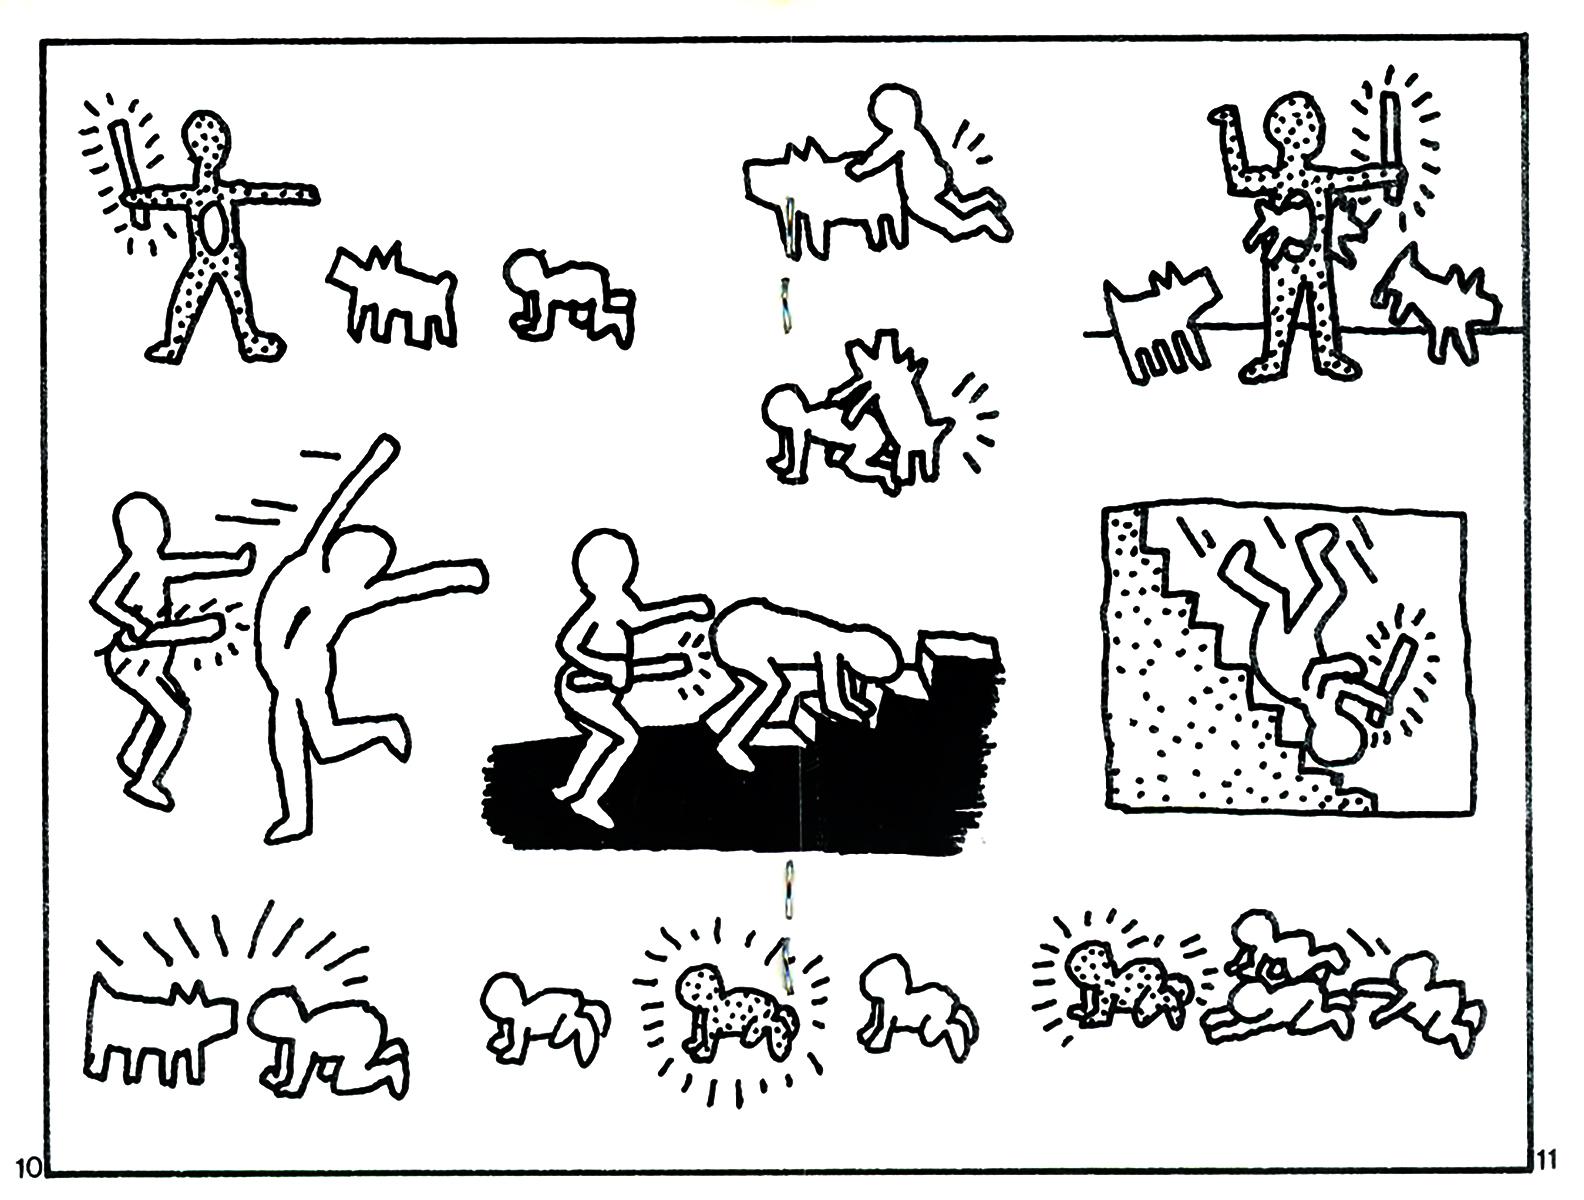 Keith Haring Public Illumination 1981:
A rare, highly collectible small pamphlet-style art magazine (measuring 4.25 x 2.75 inches), featuring a centerfold spread illustrated by Keith Haring, playfully credited under the moniker "Kip Herring." 

The